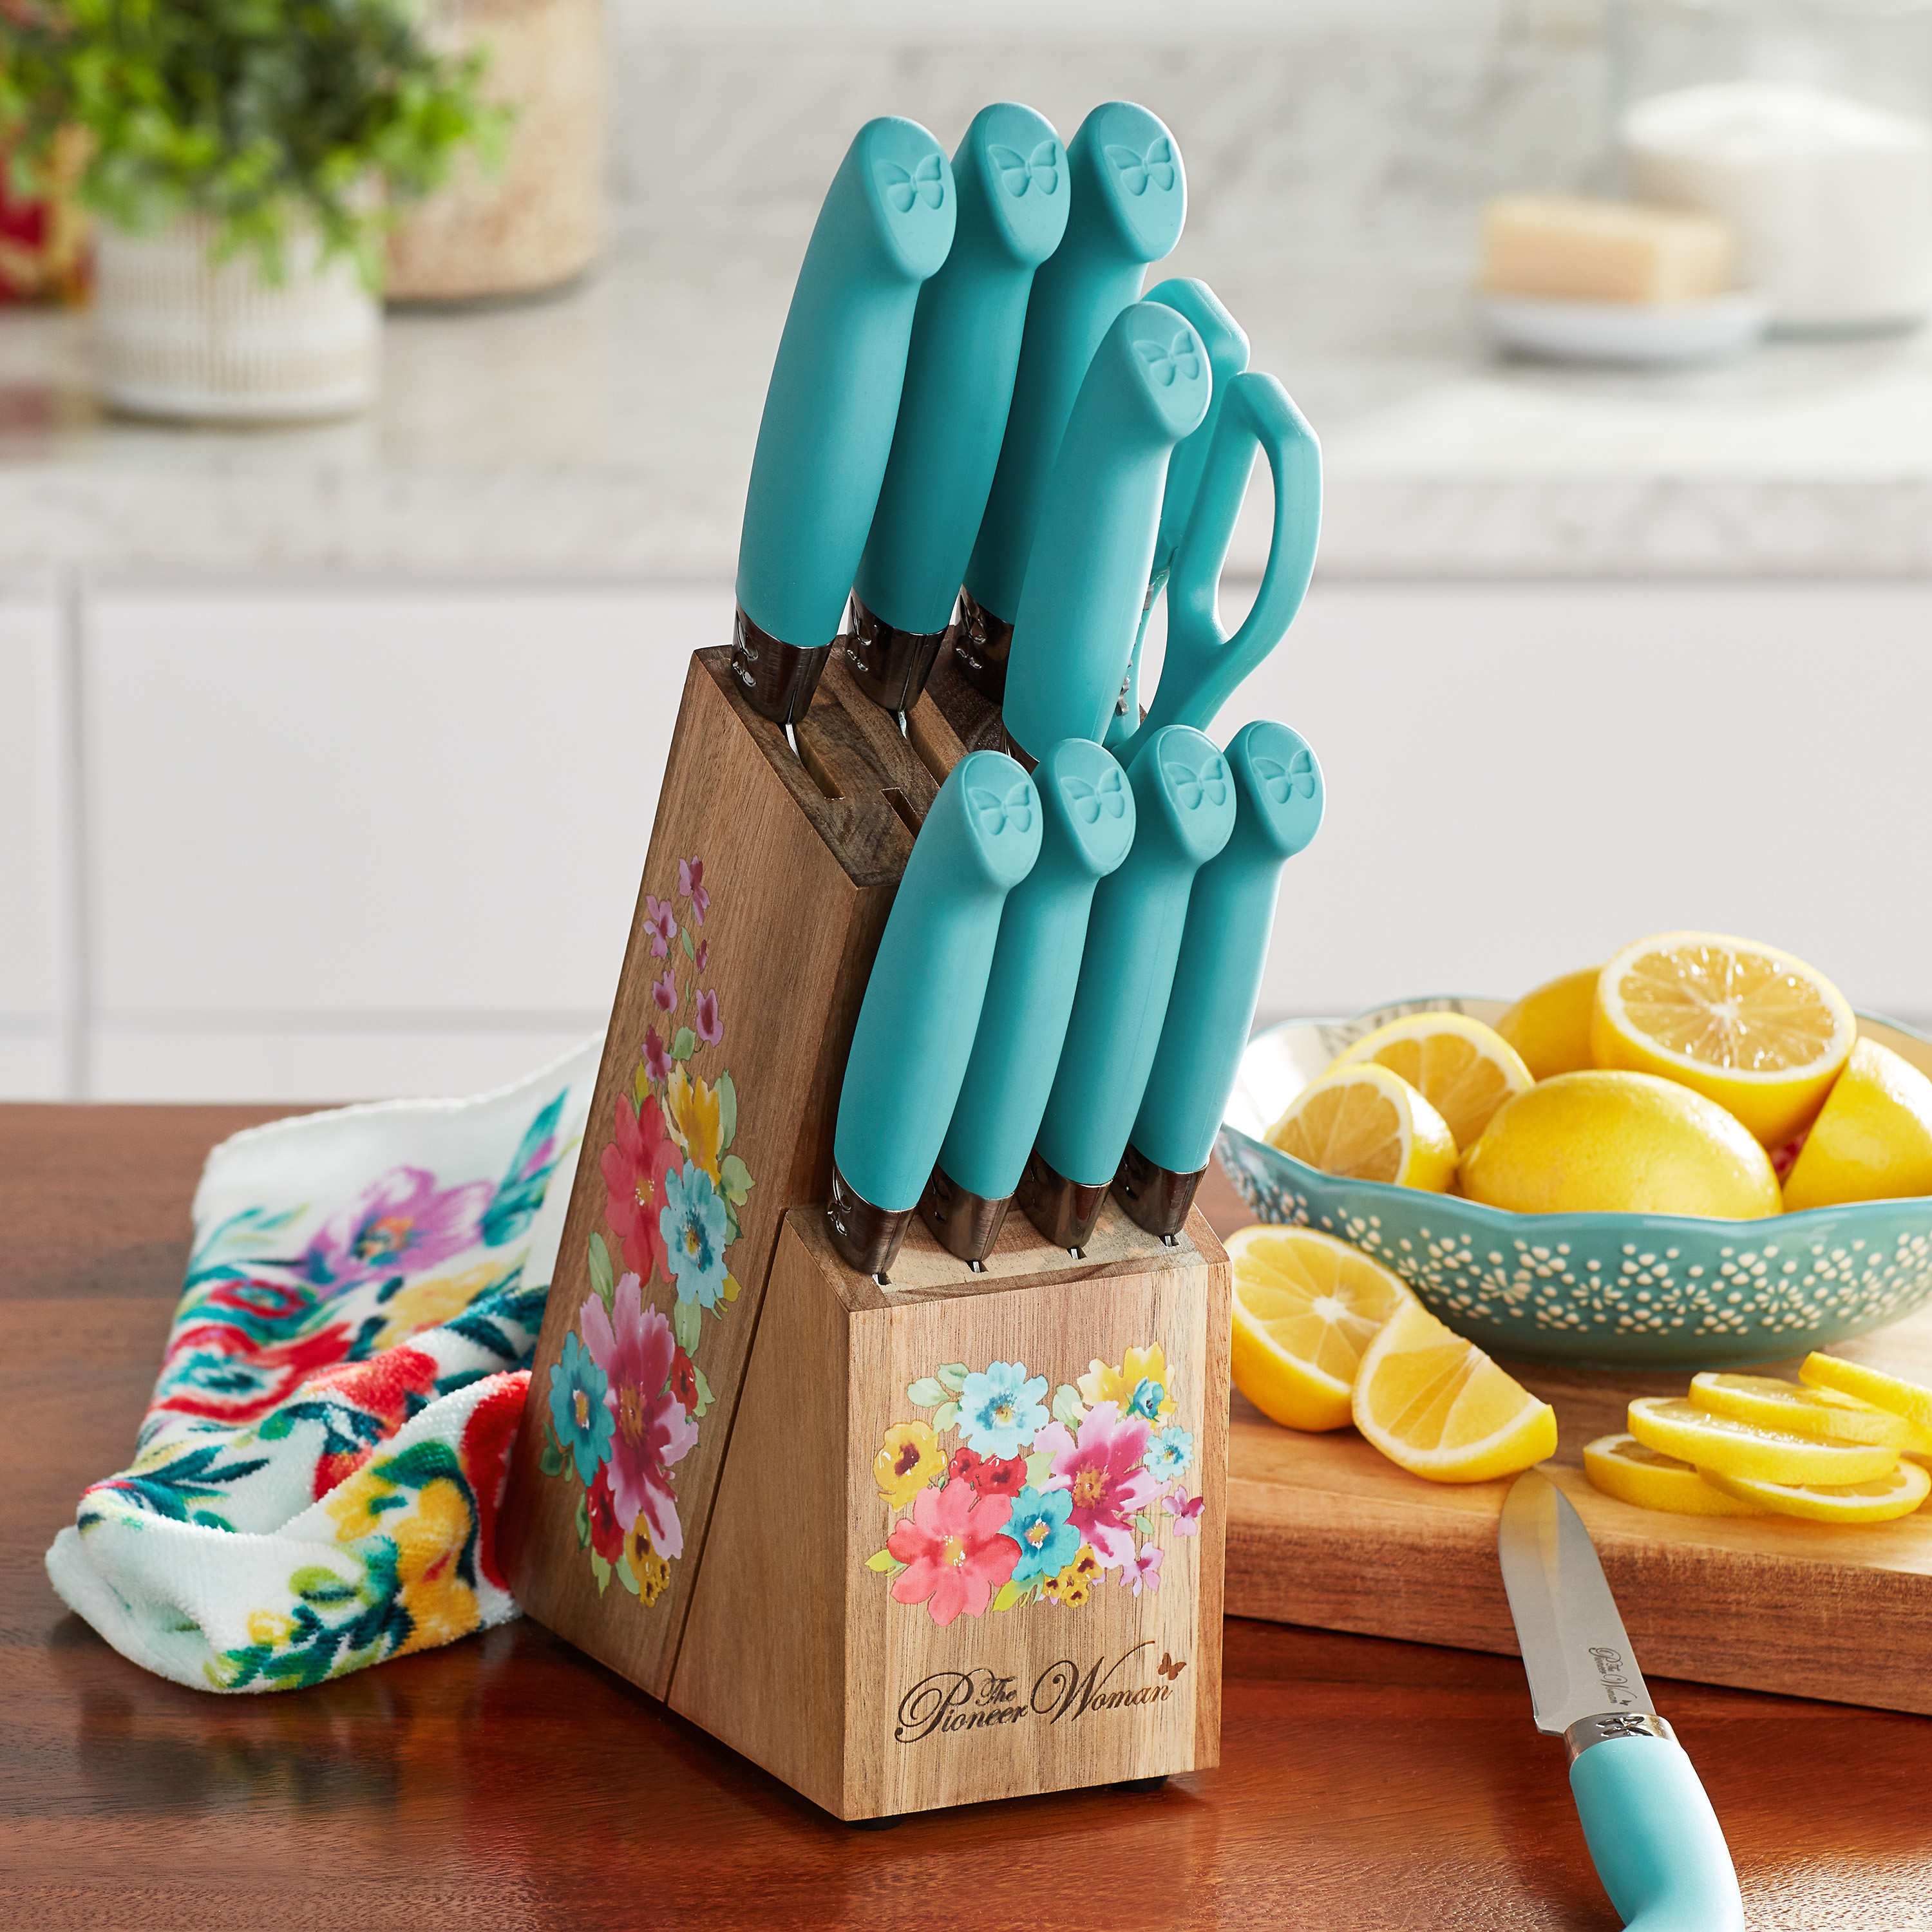 The Pioneer Woman Breezy Blossoms 11-Piece Stainless Steel Knife Block Set, Teal - image 2 of 5